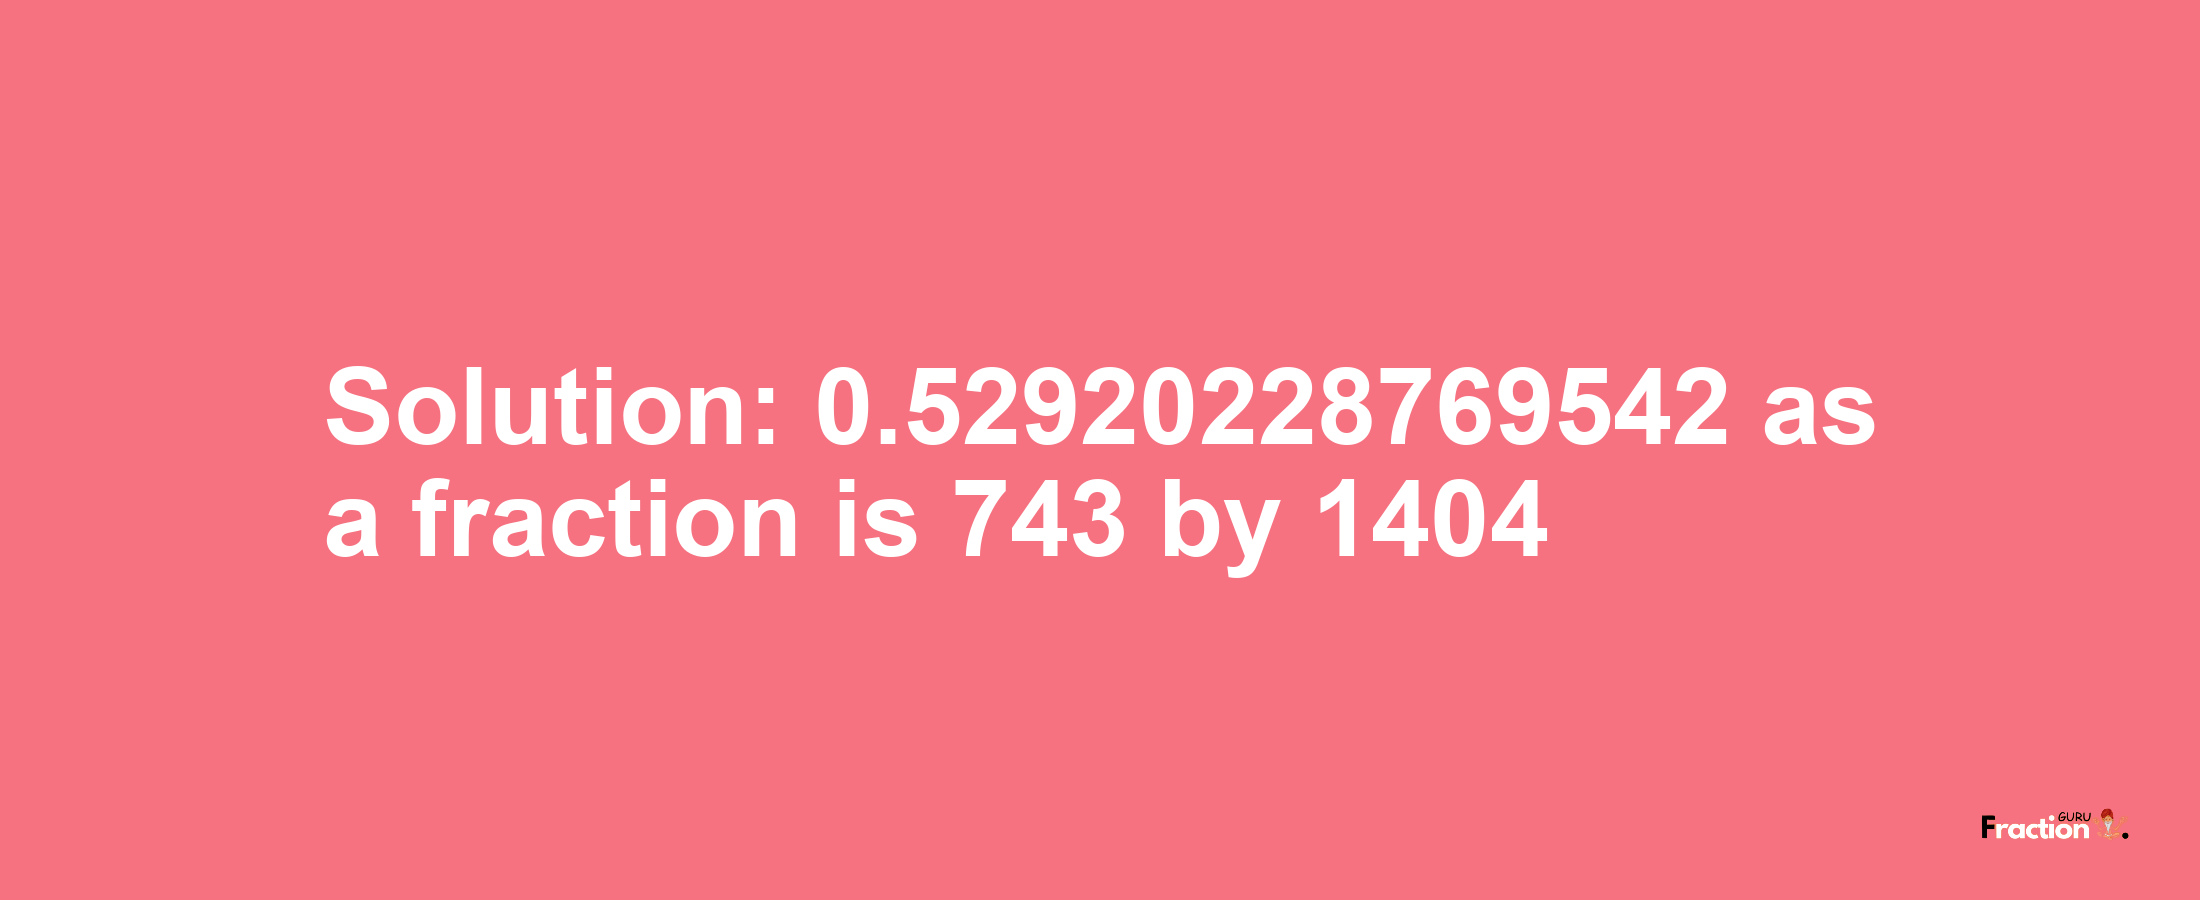 Solution:0.52920228769542 as a fraction is 743/1404